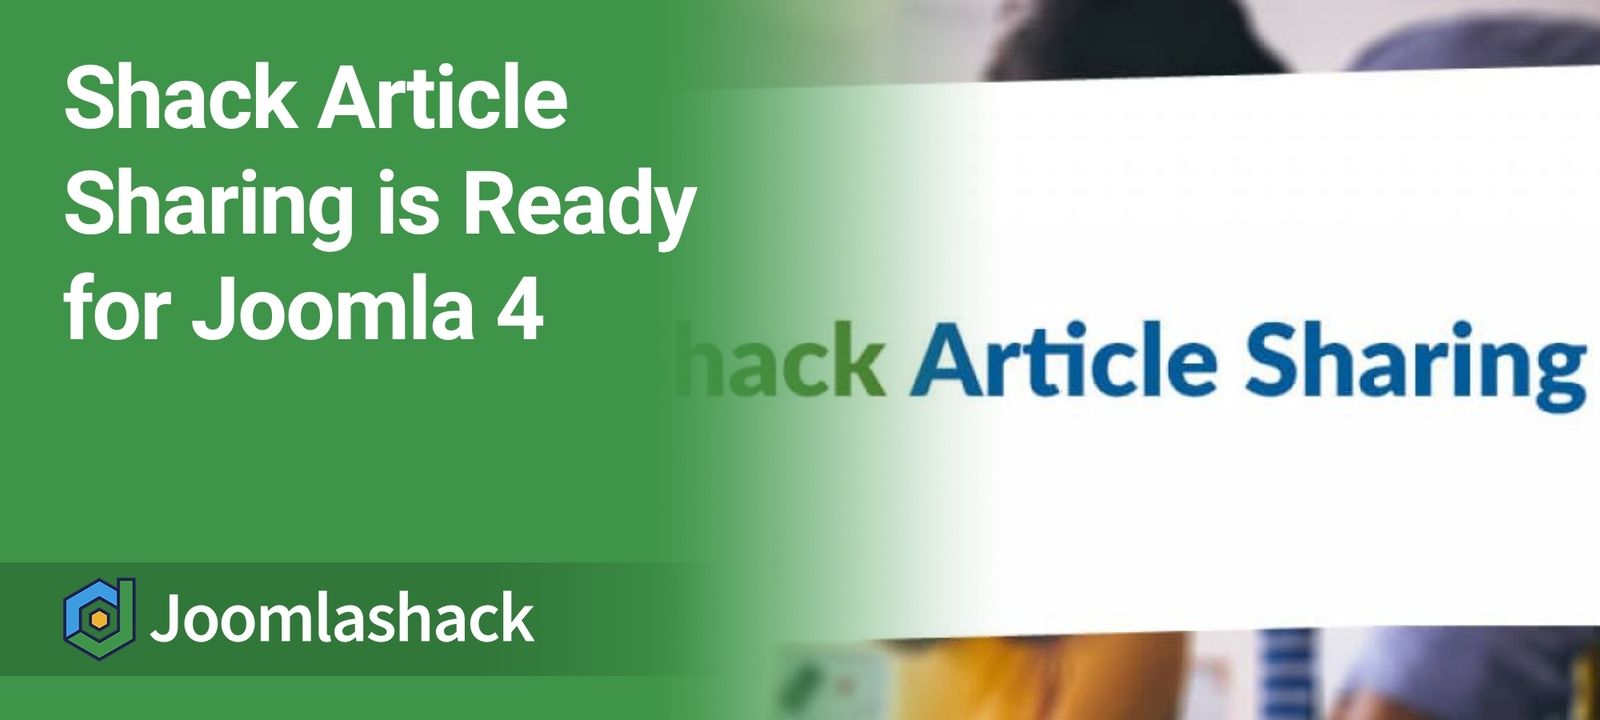 Shack Article Sharing is Ready for Joomla 4